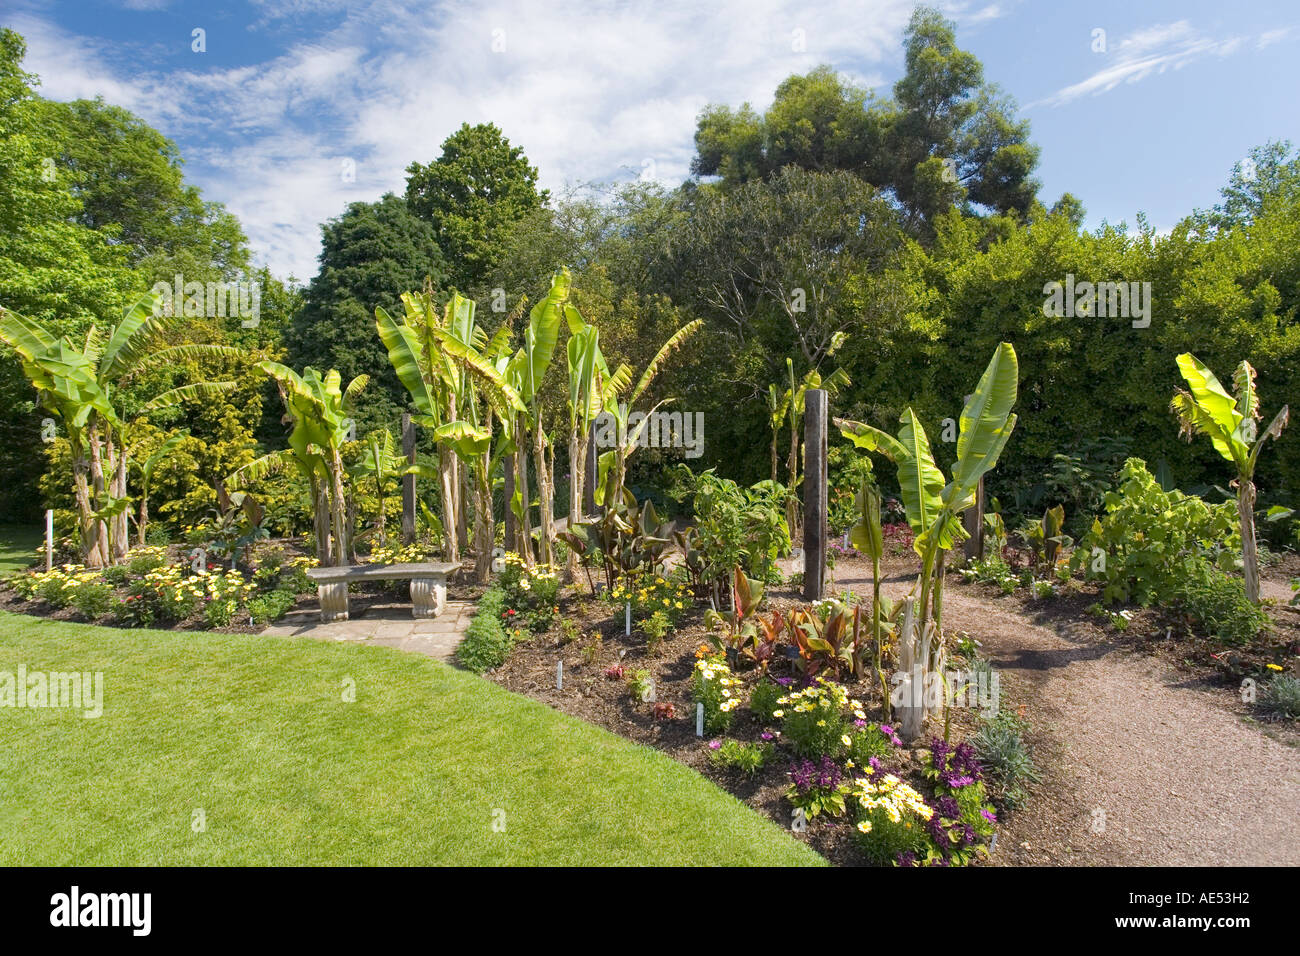 BORDER WITH MUSA AND CANNAS AT RHS GARDEN HYDE HALL, NEAR CHELMSFORD, IN JUNE Stock Photo